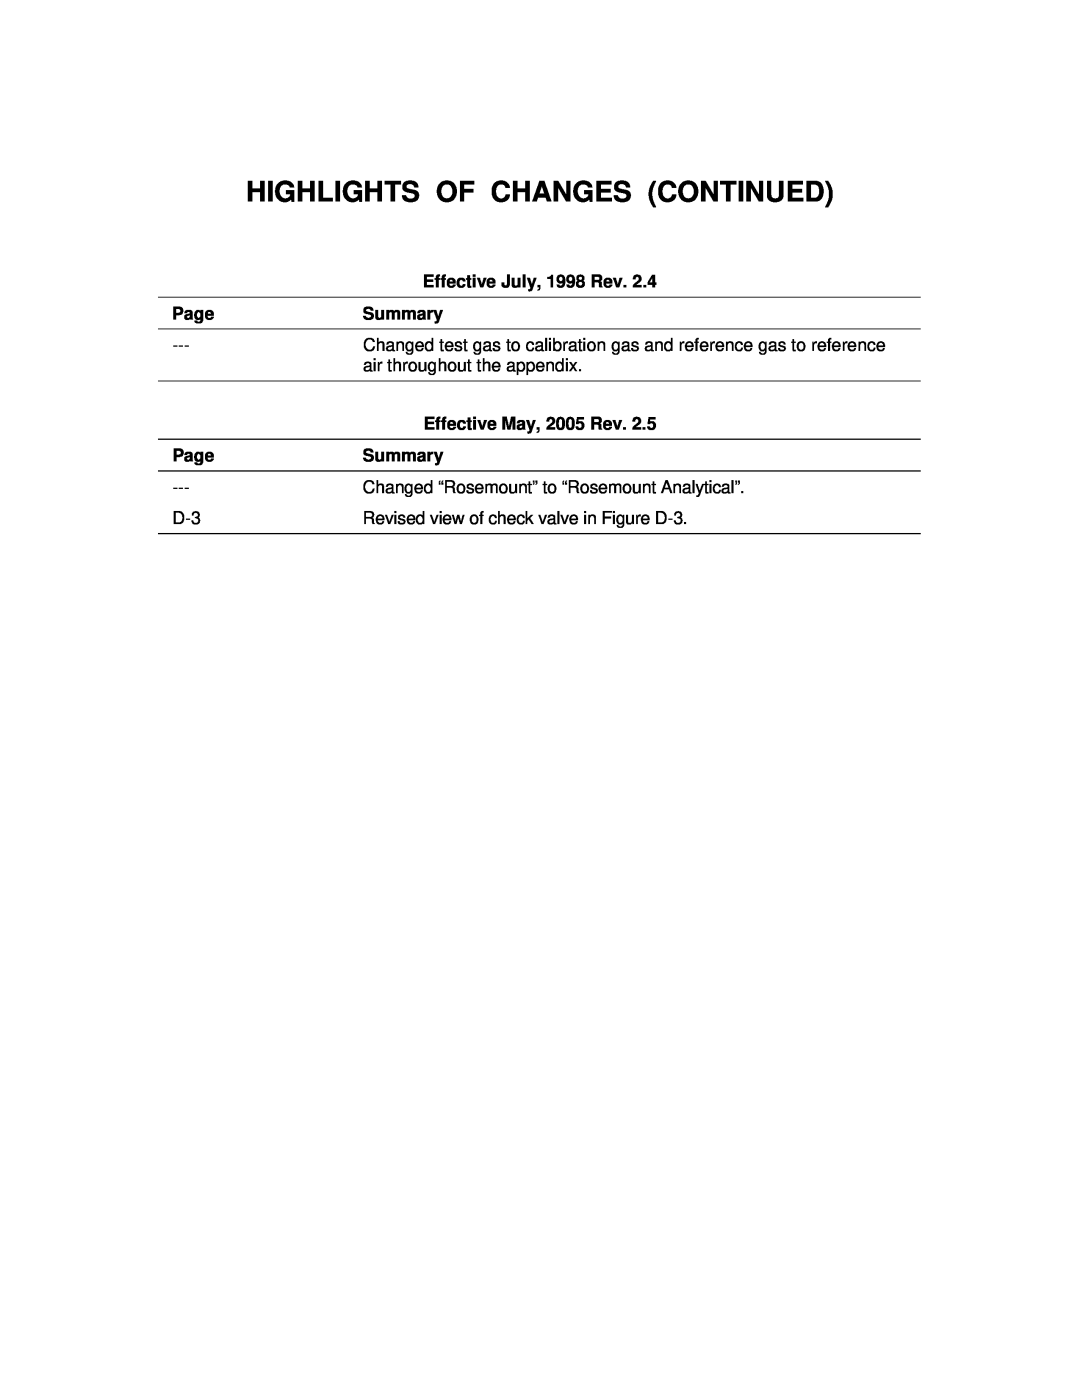 Emerson 3000 Highlights Of Changes Continued, Effective July, 1998 Rev, Page, Summary, Effective May, 2005 Rev 